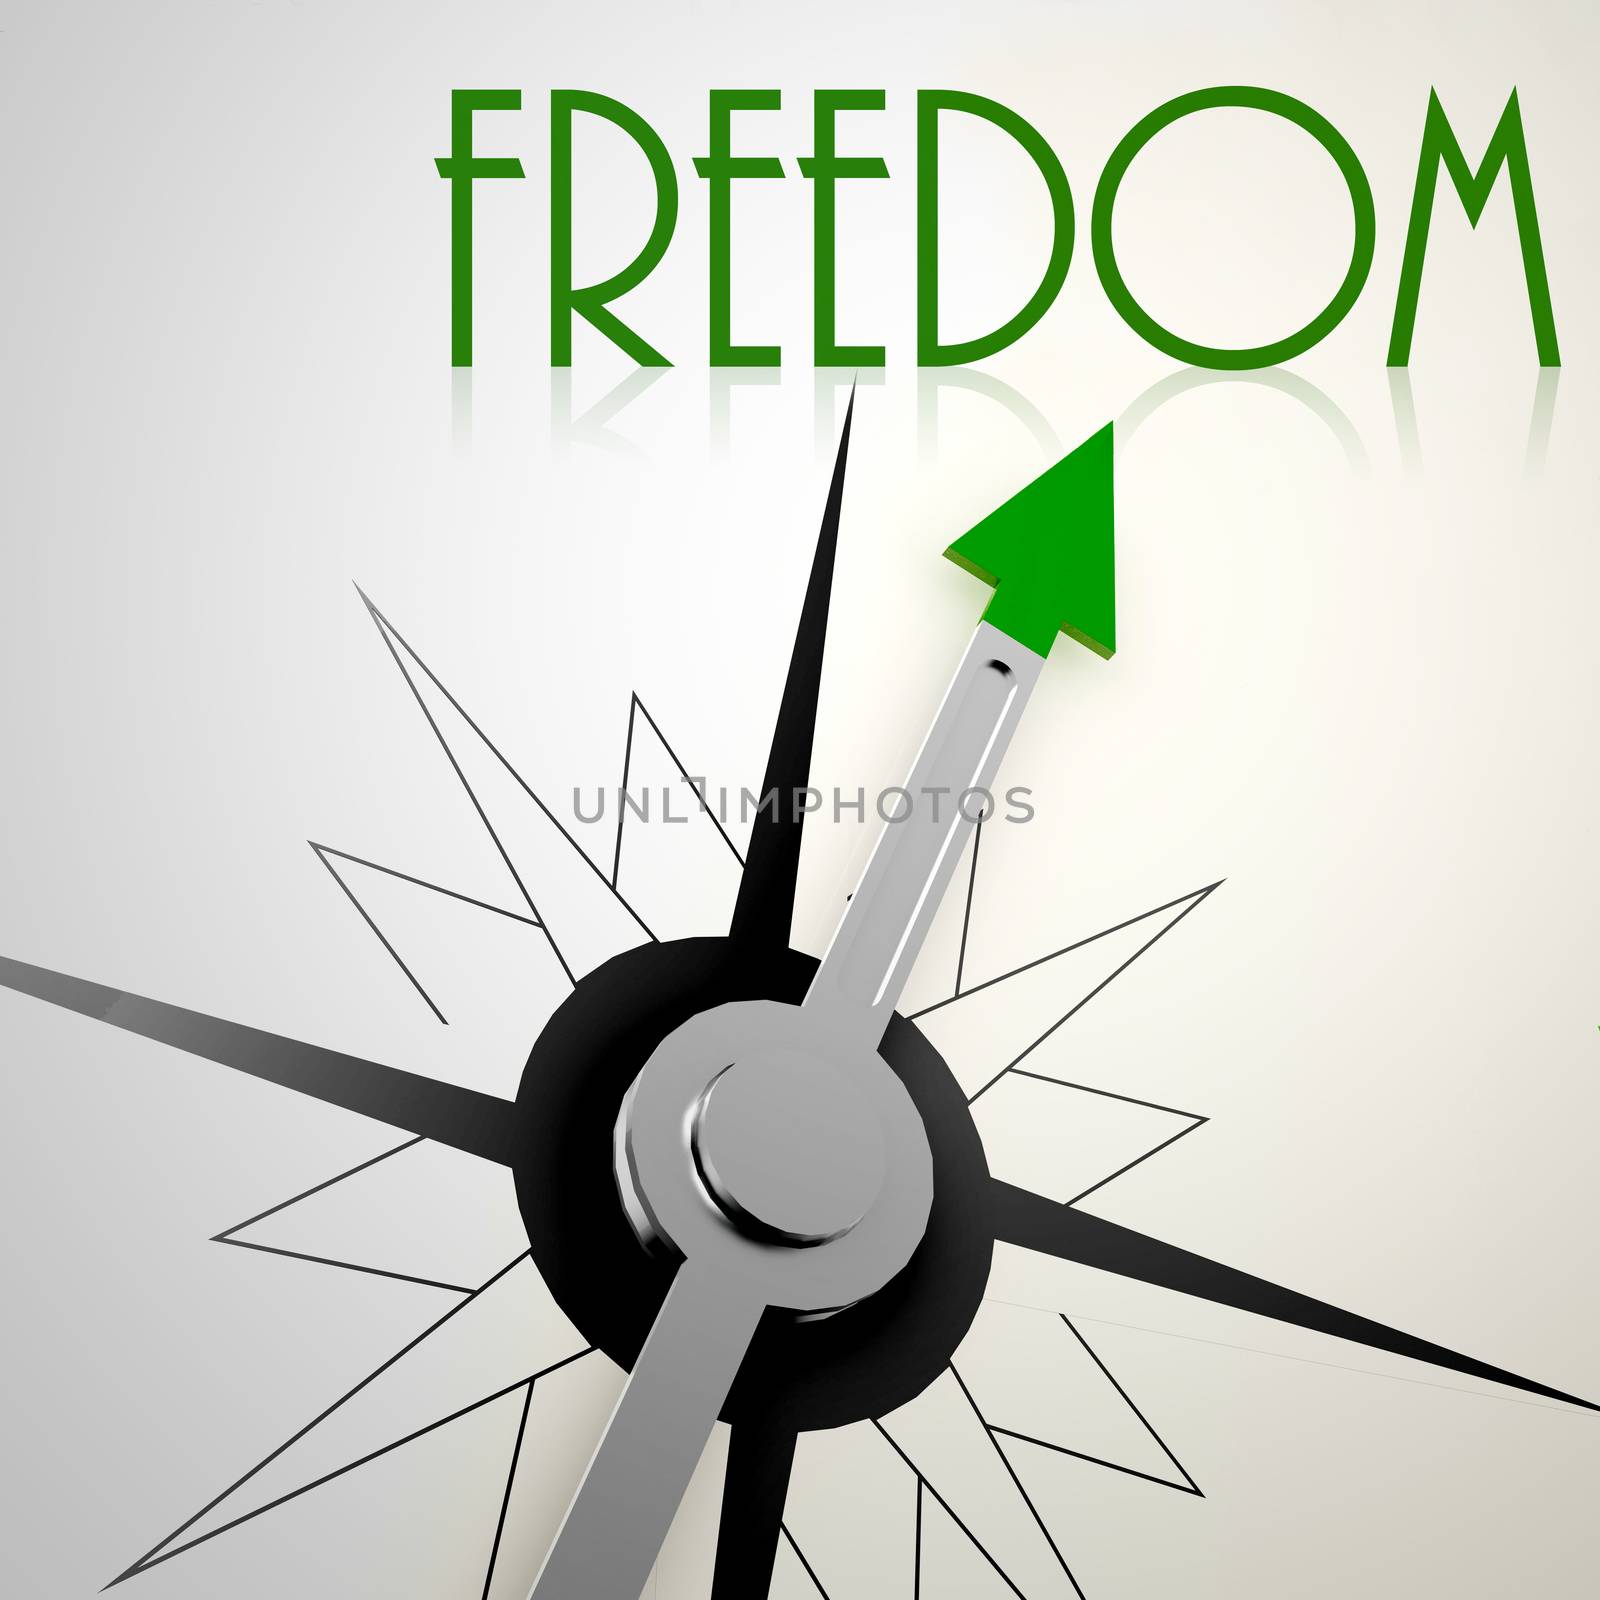 Freedom on green compass. Concept of healthy lifestyle